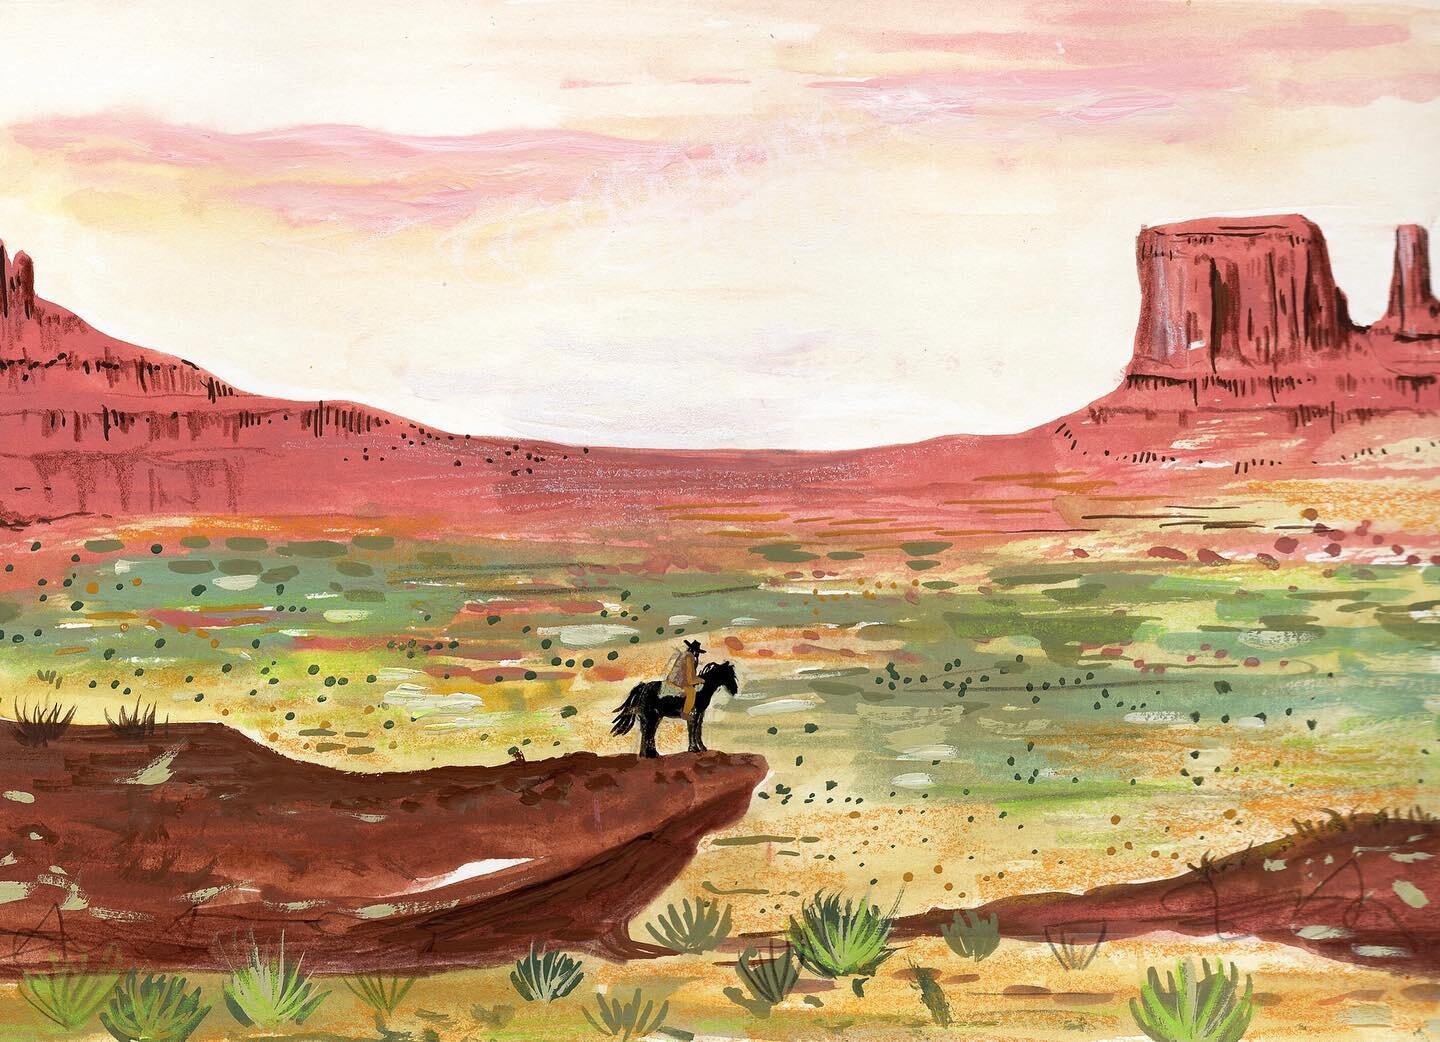 Its August! 🌞 This months calendar page was inspired by Monument Valley in Utah, with a crossover of Red Dead Redemption 2 cause I&rsquo;m a cowboy nerd. Also just finally made some prints of this that will be in my shop shortly 🌅